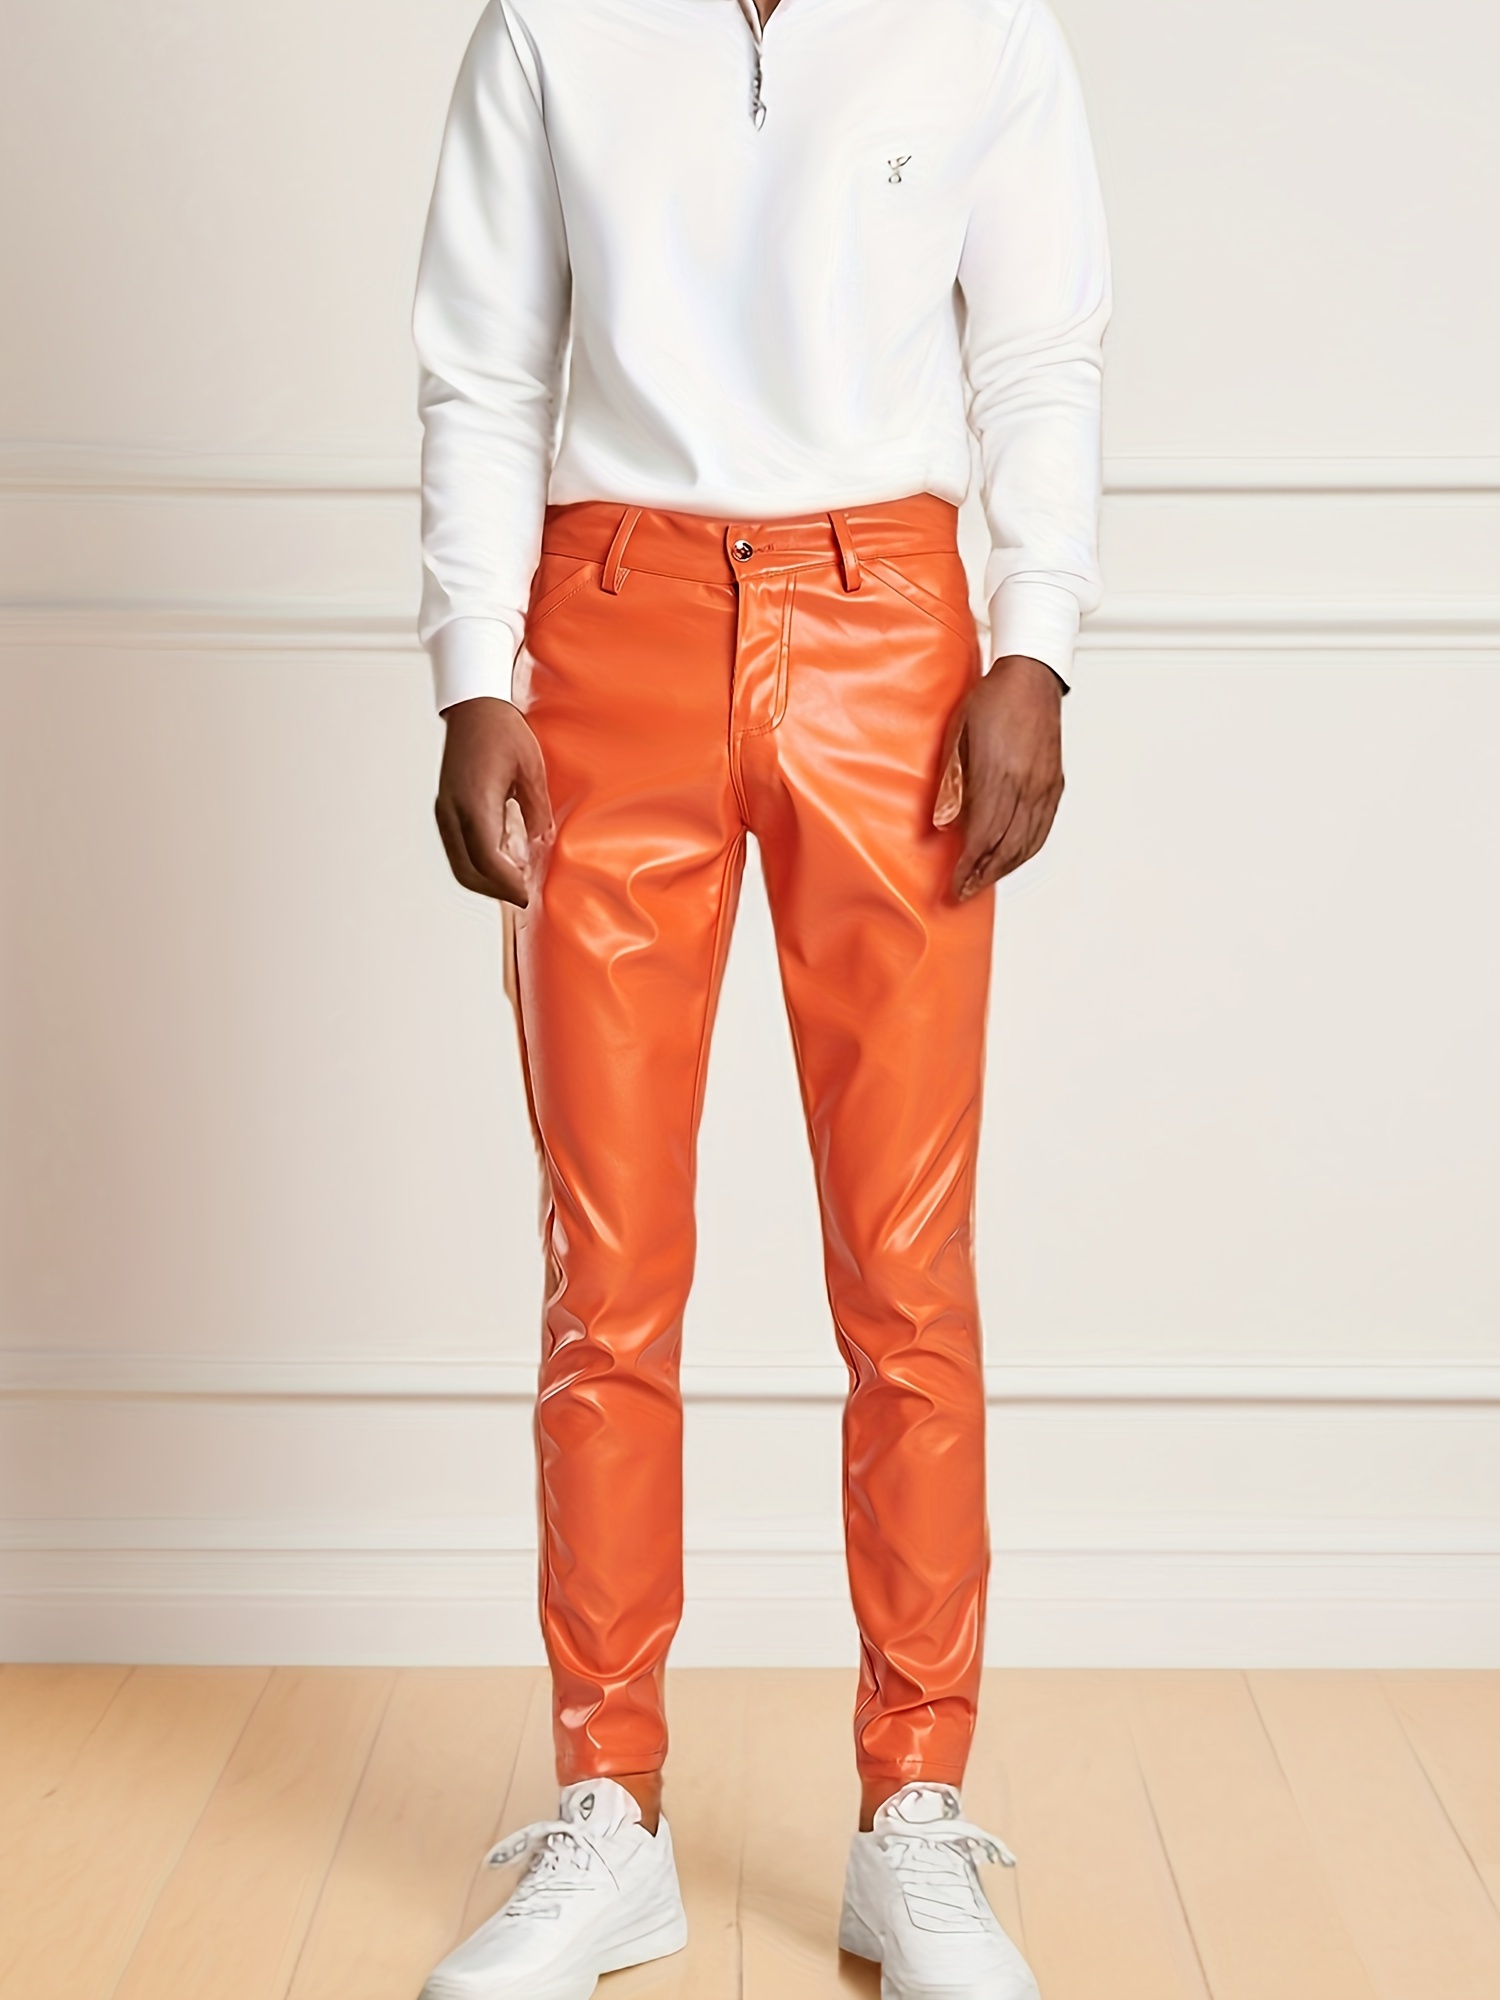 Buy Leather Pants For Men, Top Price